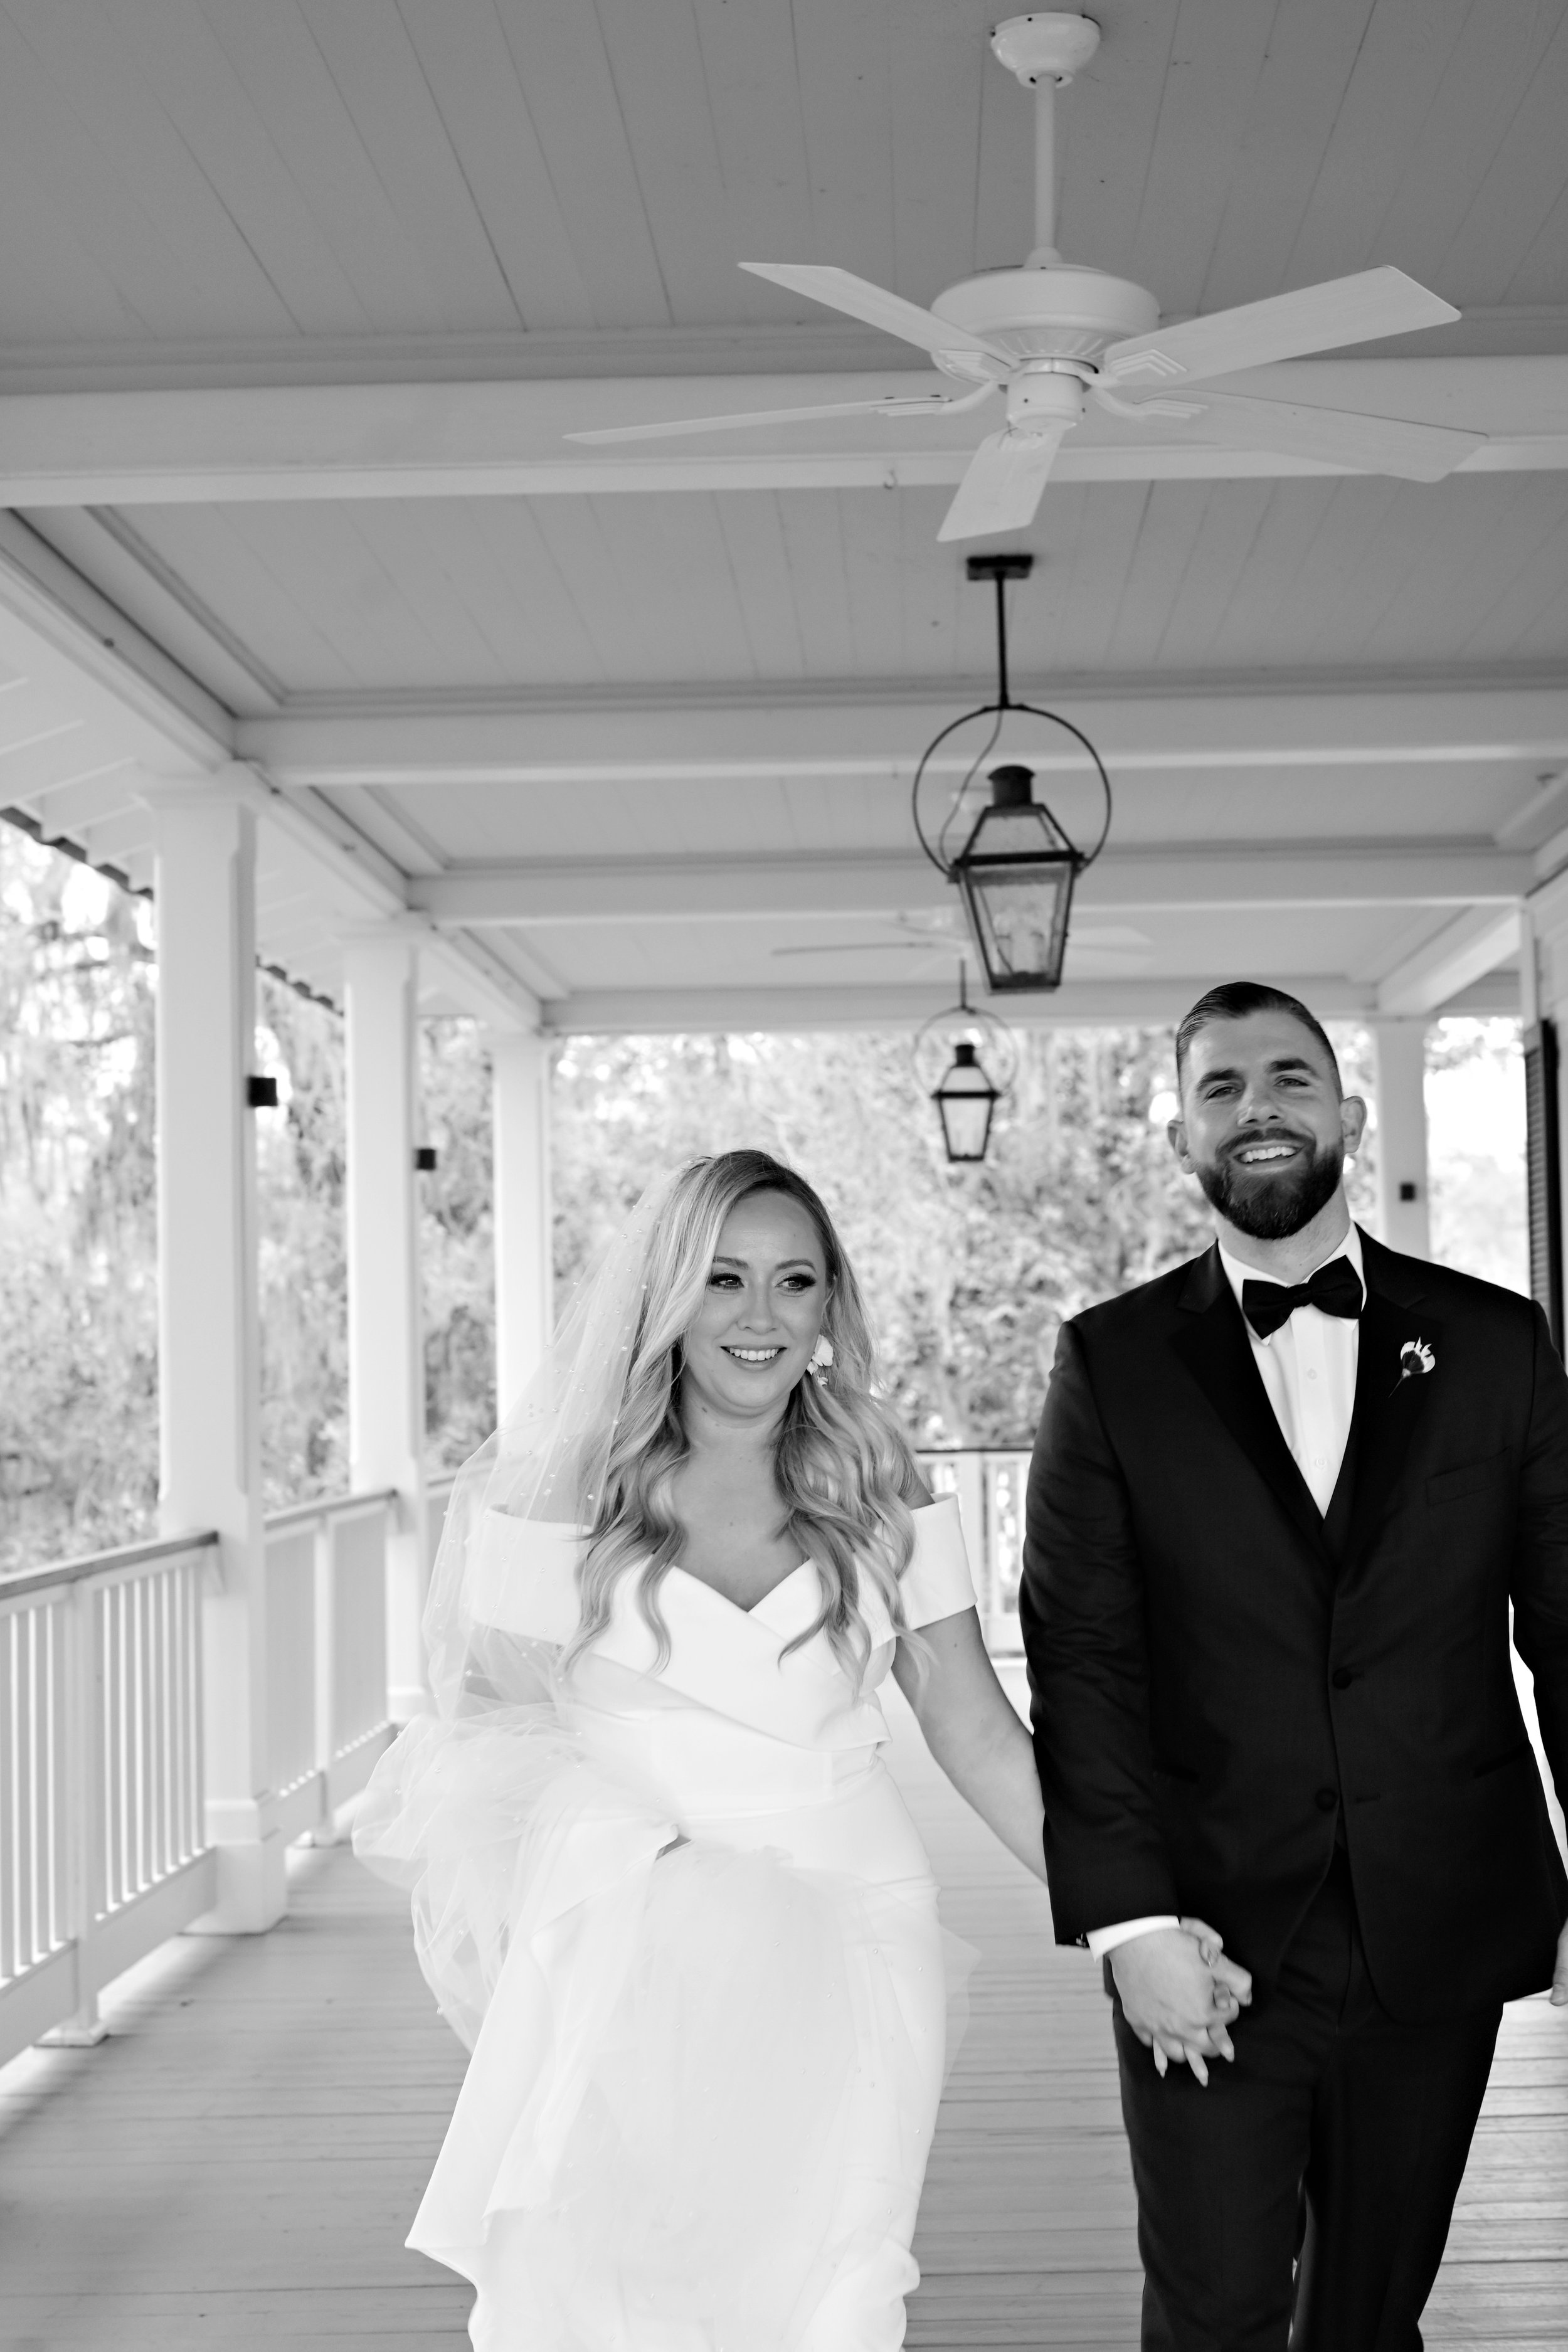 real-savanna-bride-in-the-lottie-gown-by-made-wth-love-purchased-from-savannah-bridal-shop-ivory-and-beau-savannah-bridal-boutique-savannah-wedding-gowns-savannah-wedding-dresses-13.JPG